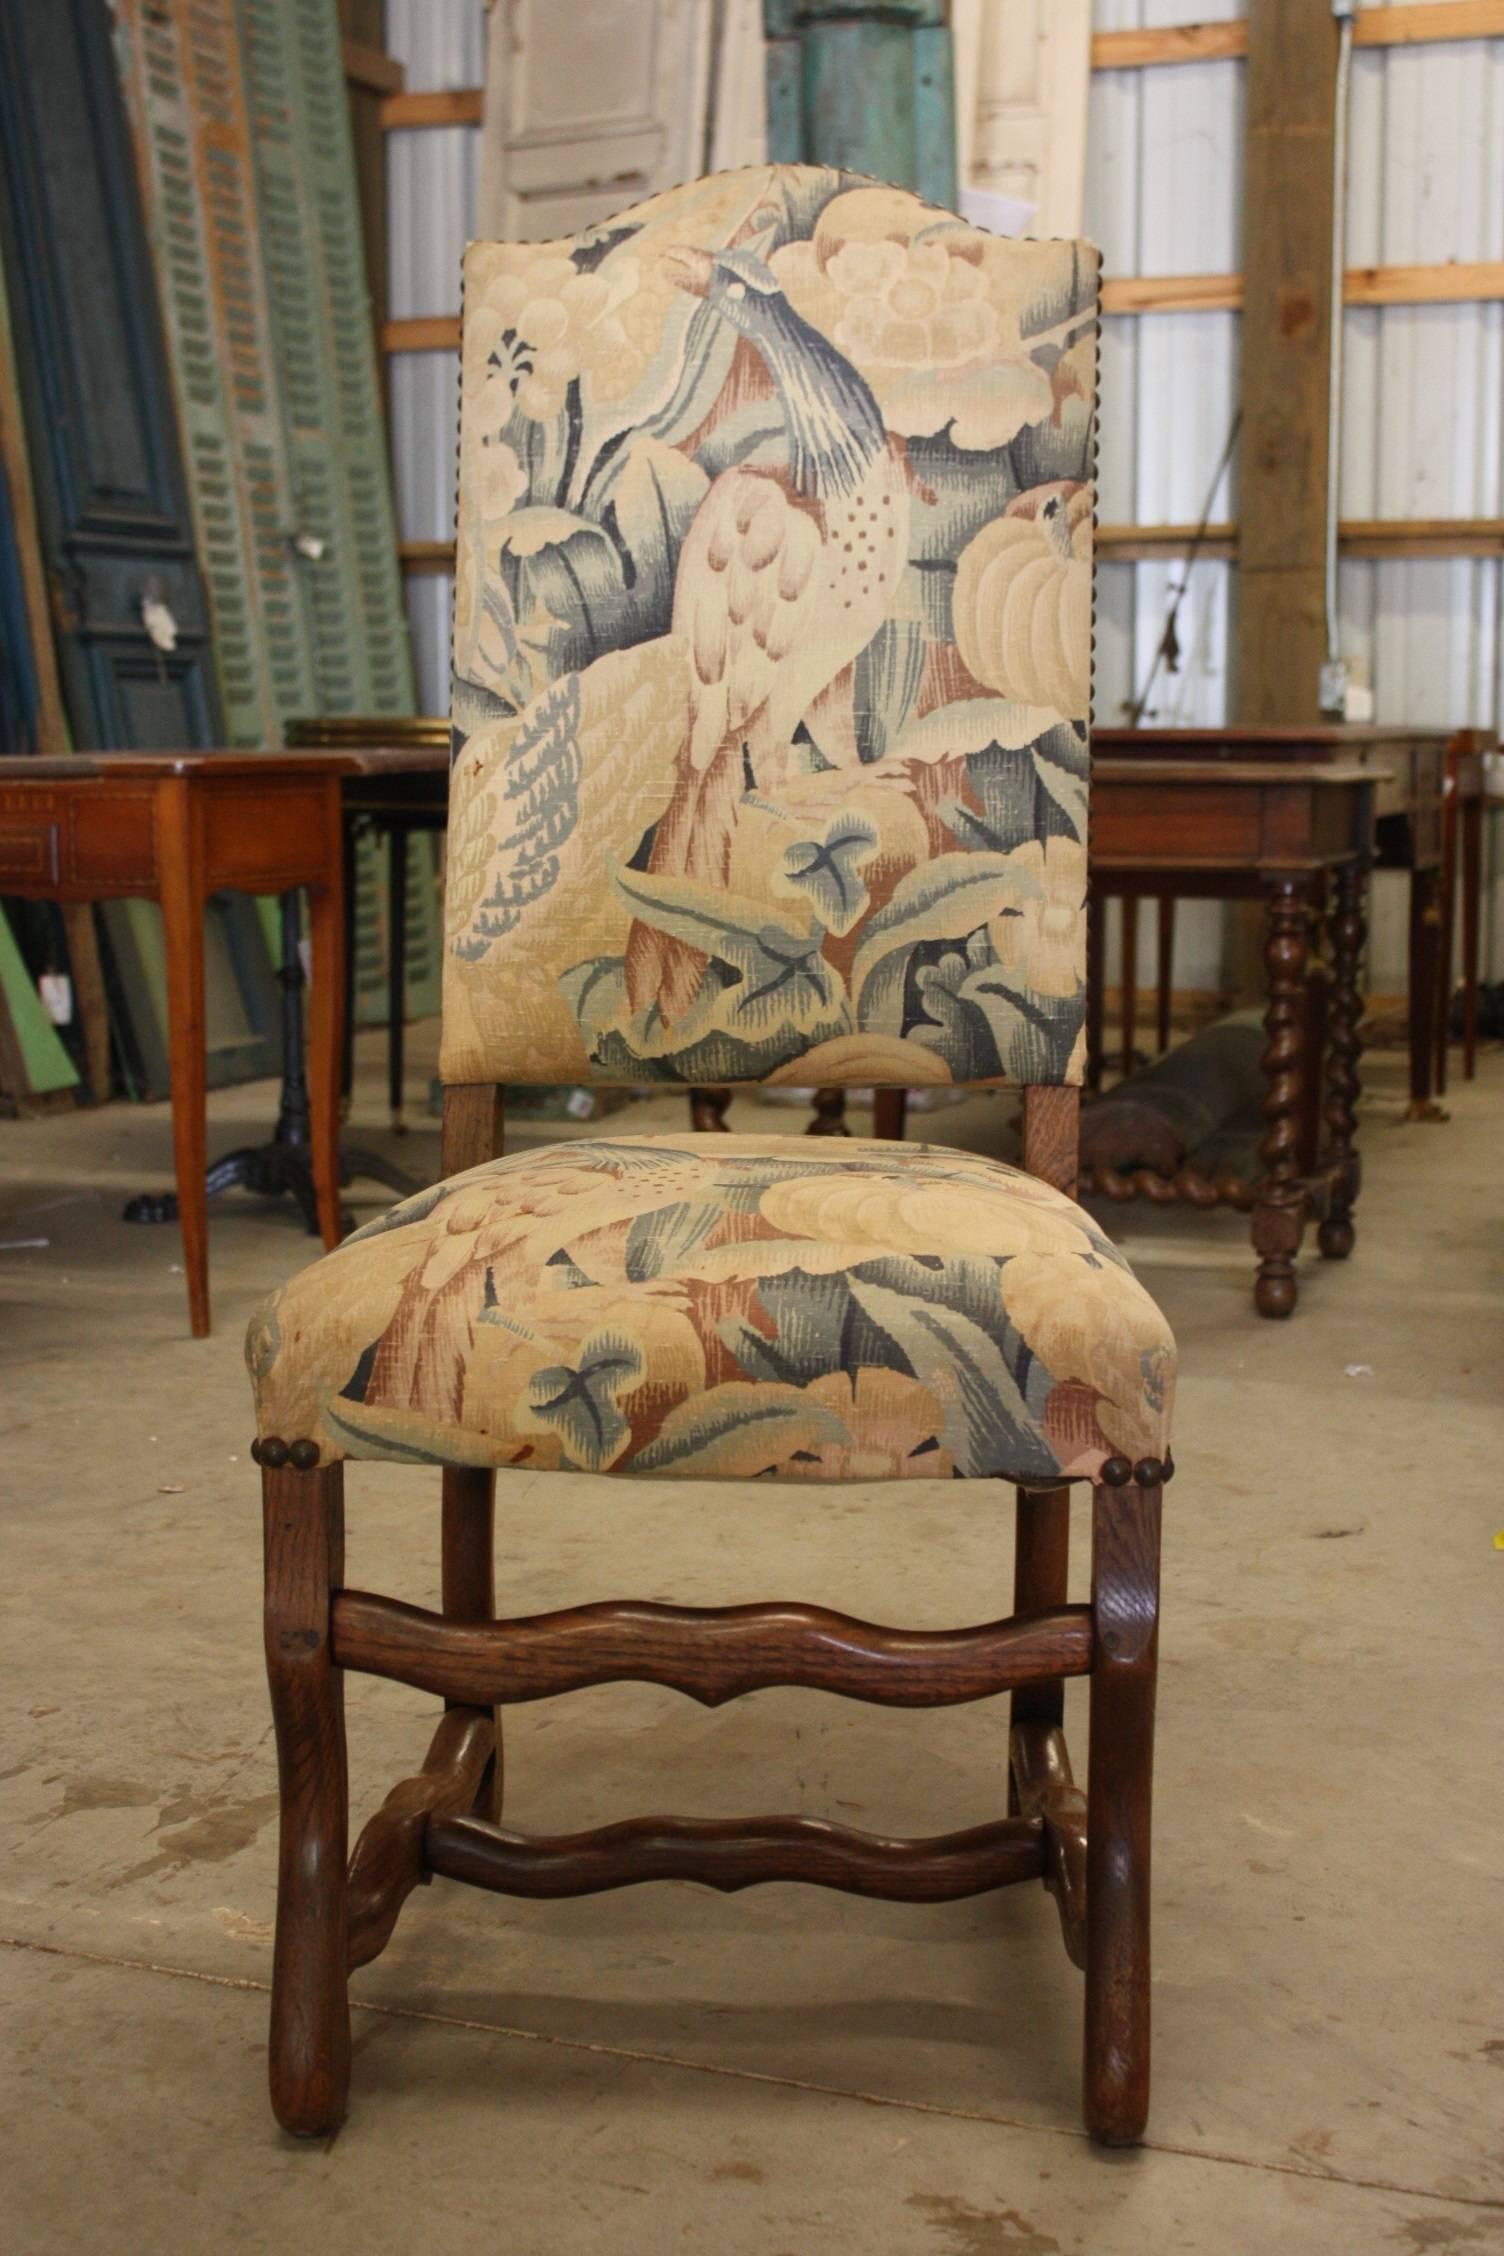 Set of six, 19th century Os de Mouton or mutton bone chairs from France. Frames are in really good condition and the upholstery is in fair condition. The fabric is very attractive, it just has a few tears.